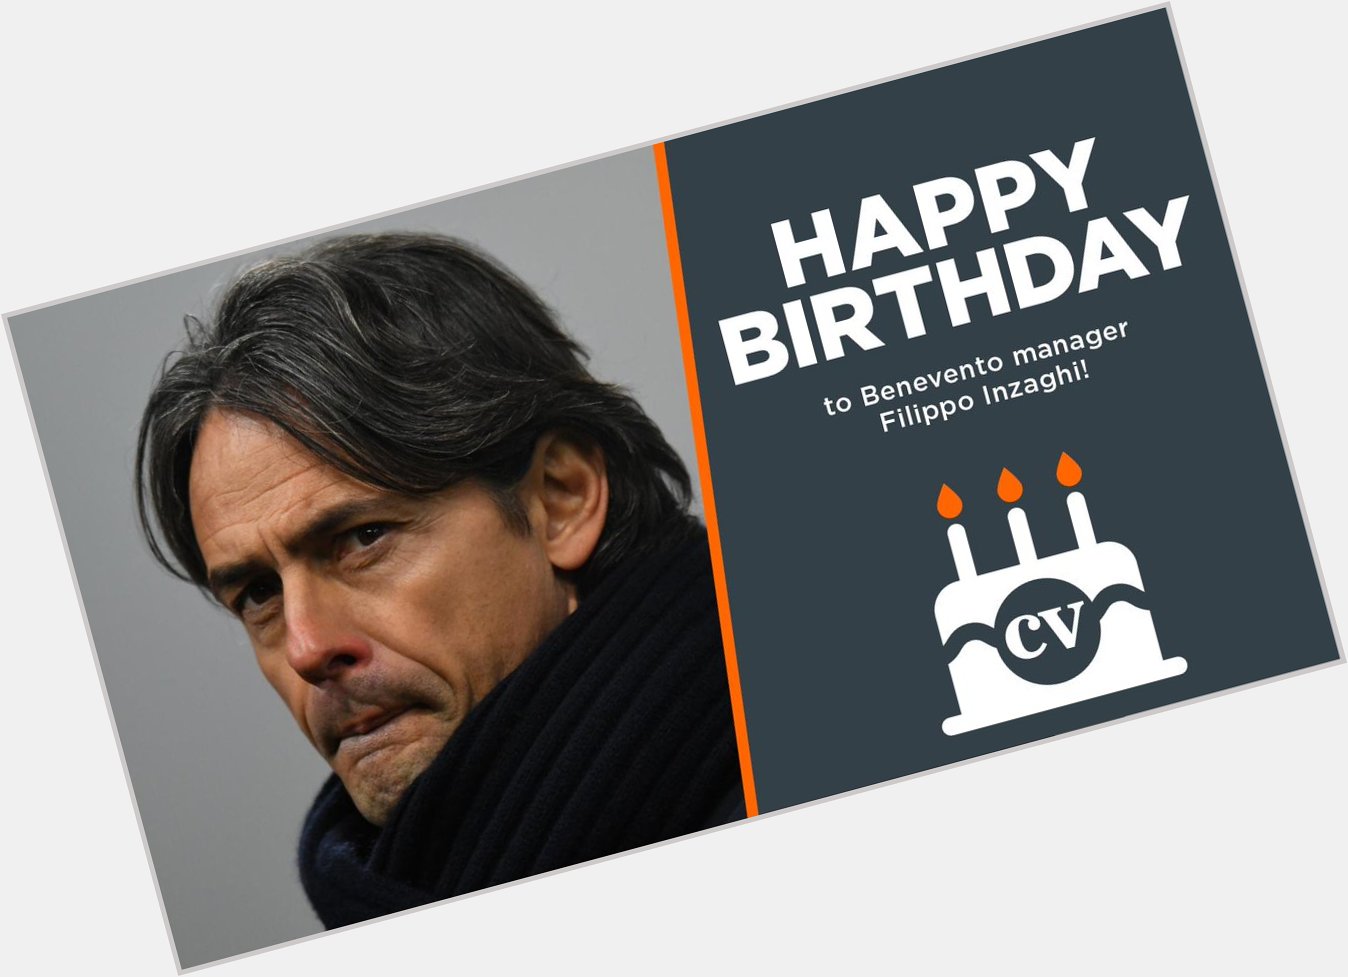  Happy birthday to manager Filippo Inzaghi!  